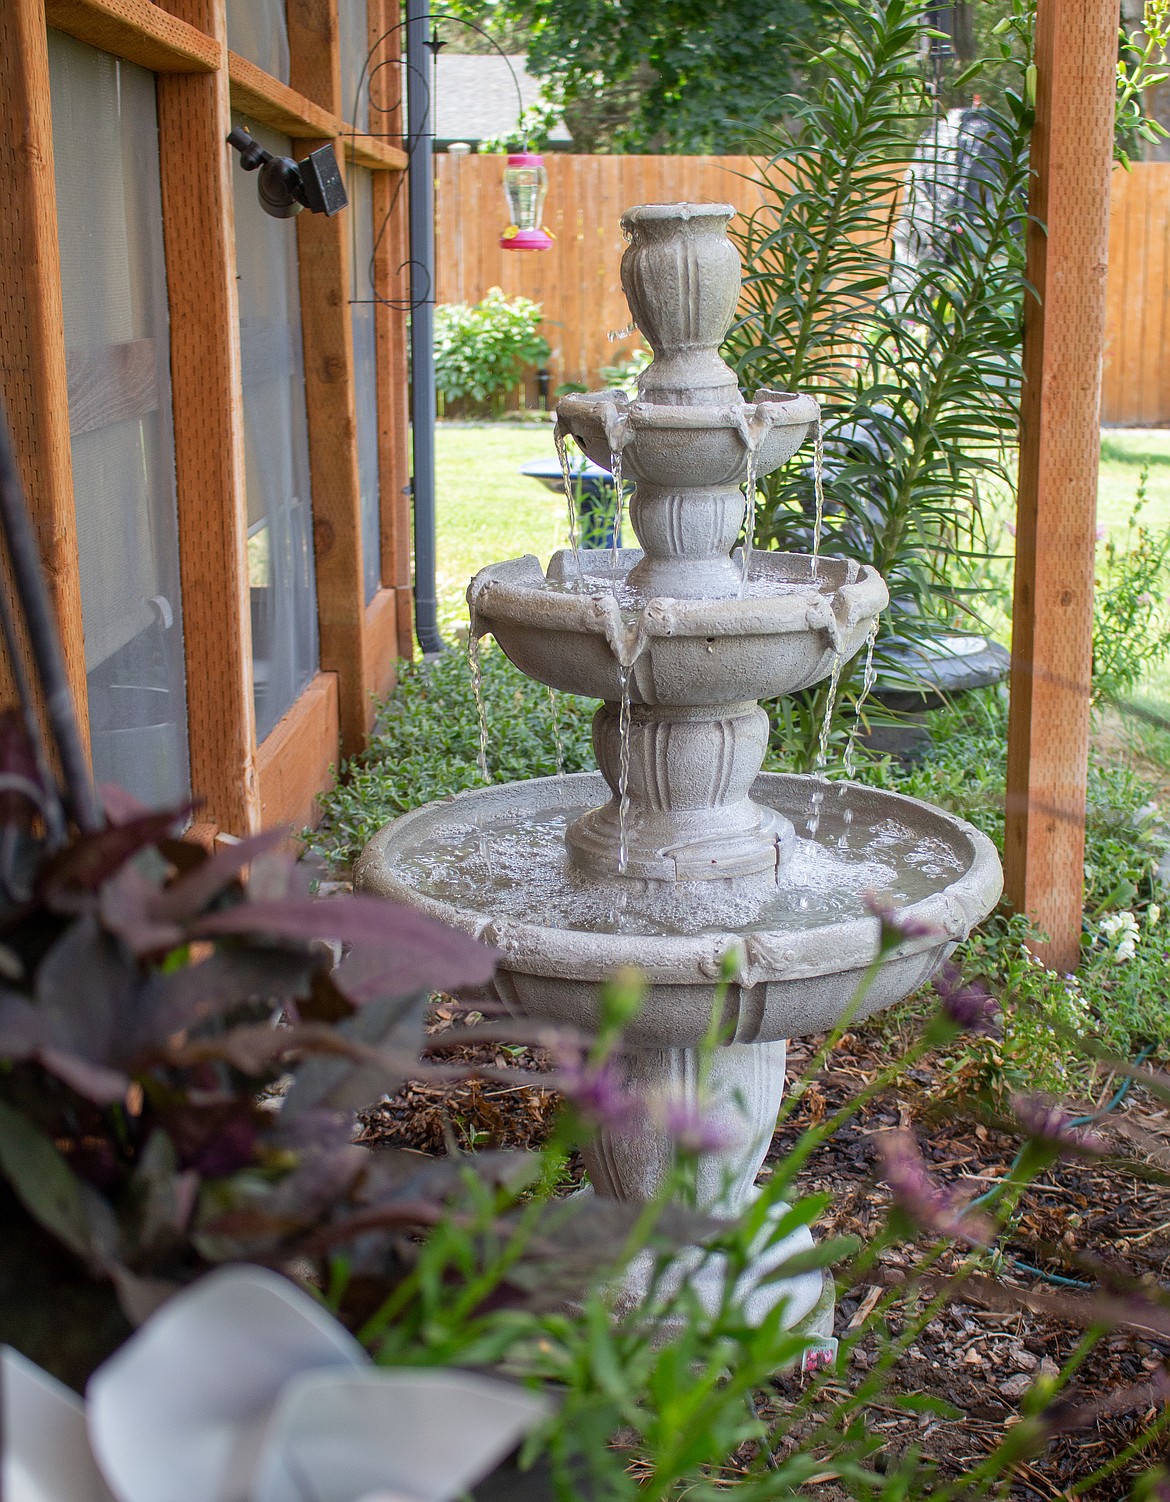 The three-tier garden fountain in Bobbie Bodenman’s backyard in Moses Lake was filled with dirt when she moved to her new home.